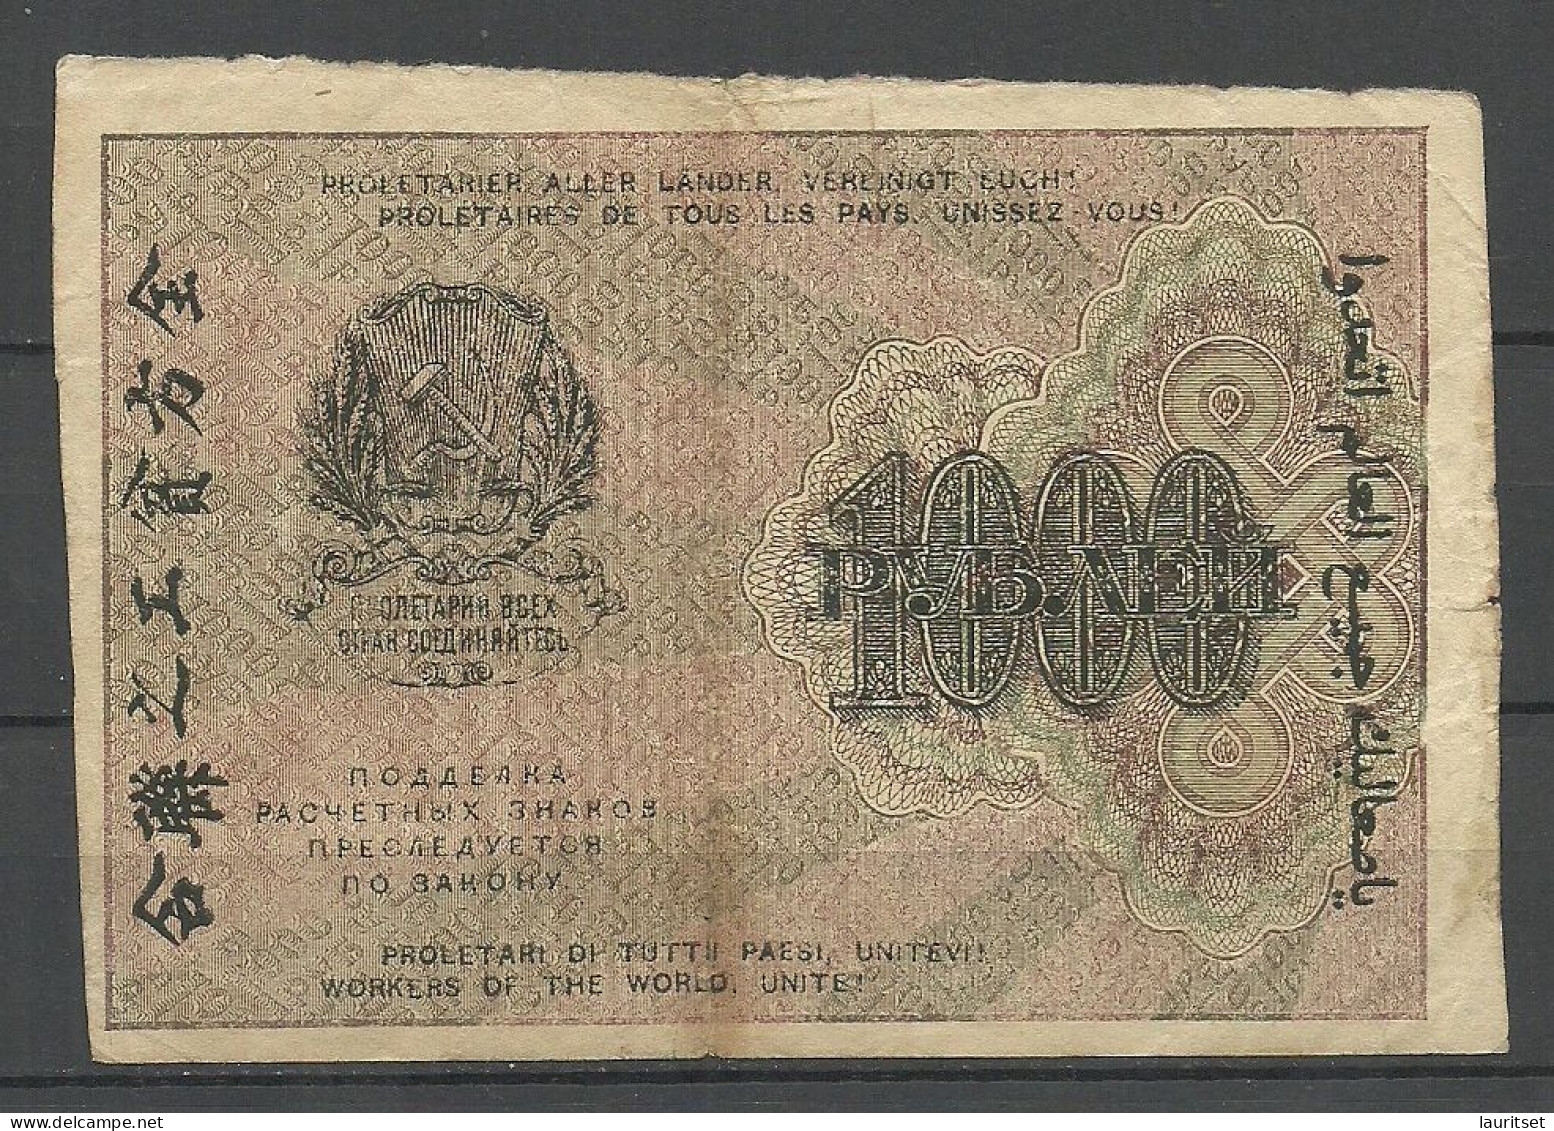 Imperial RUSSLAND RUSSIA Russie Banknote 1000 Roubles Bank Note 1919 - Russie